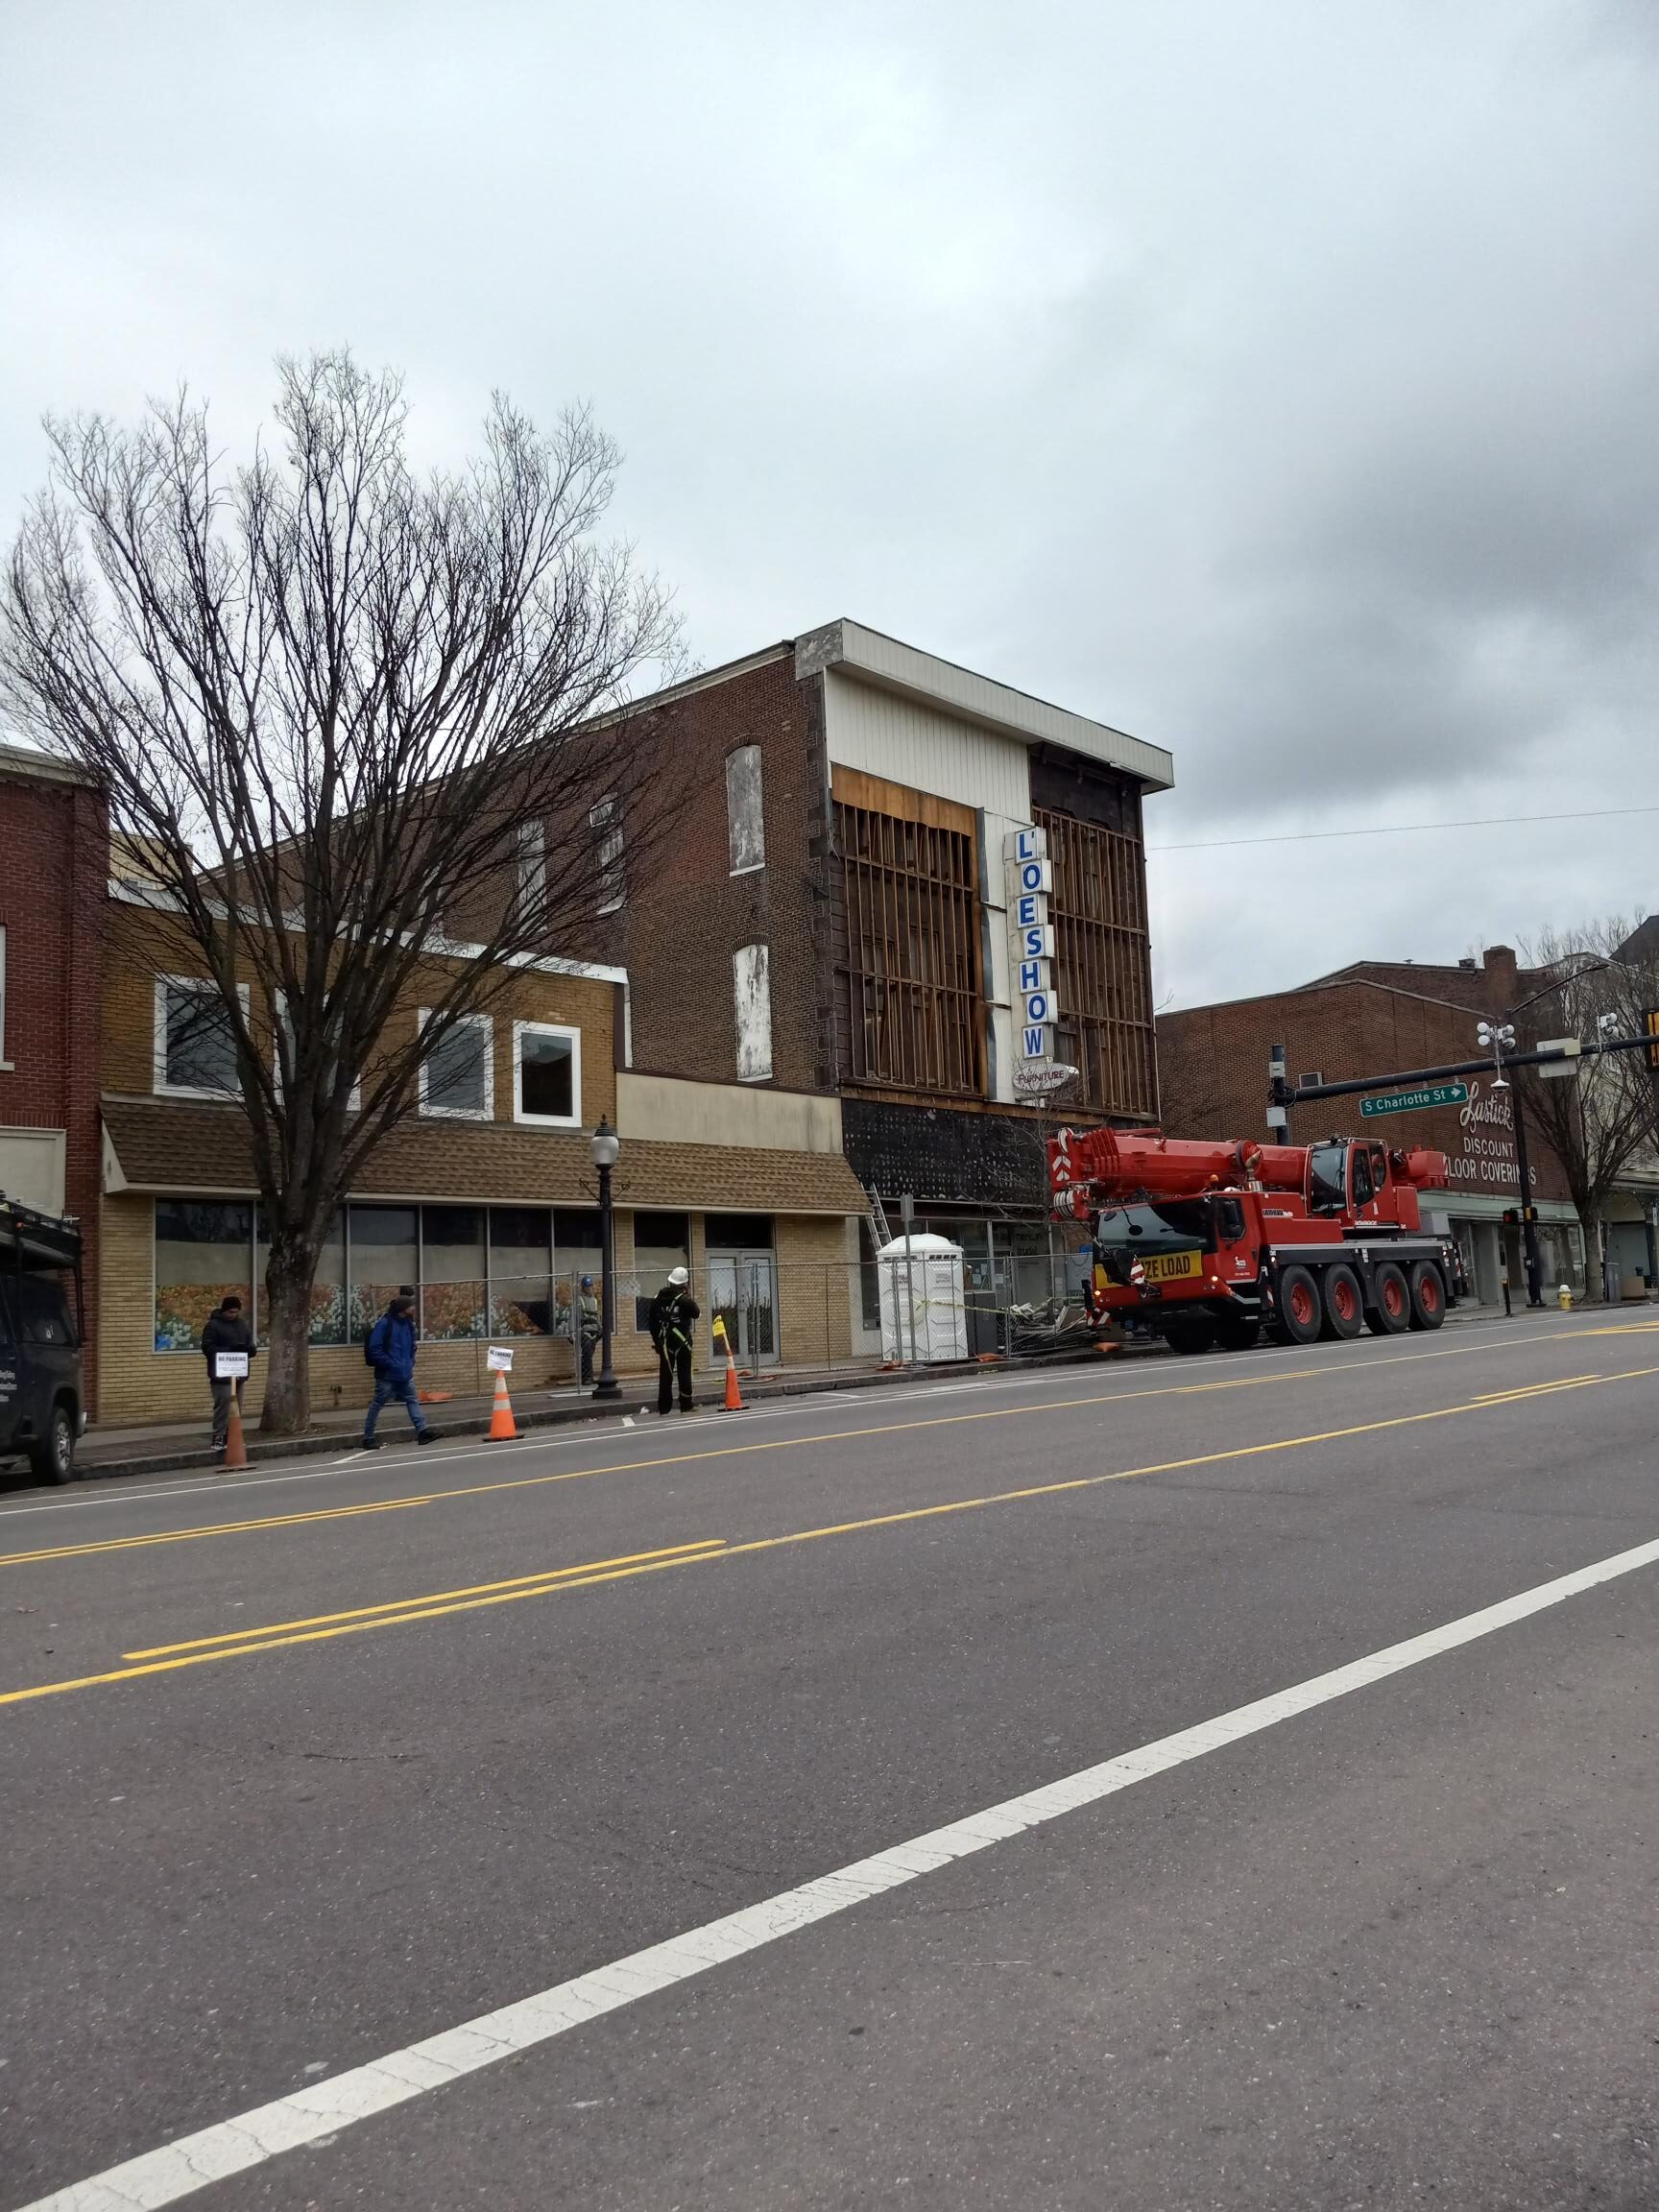 Mixed Use Project in Downtown Pottstown Begins on High Street